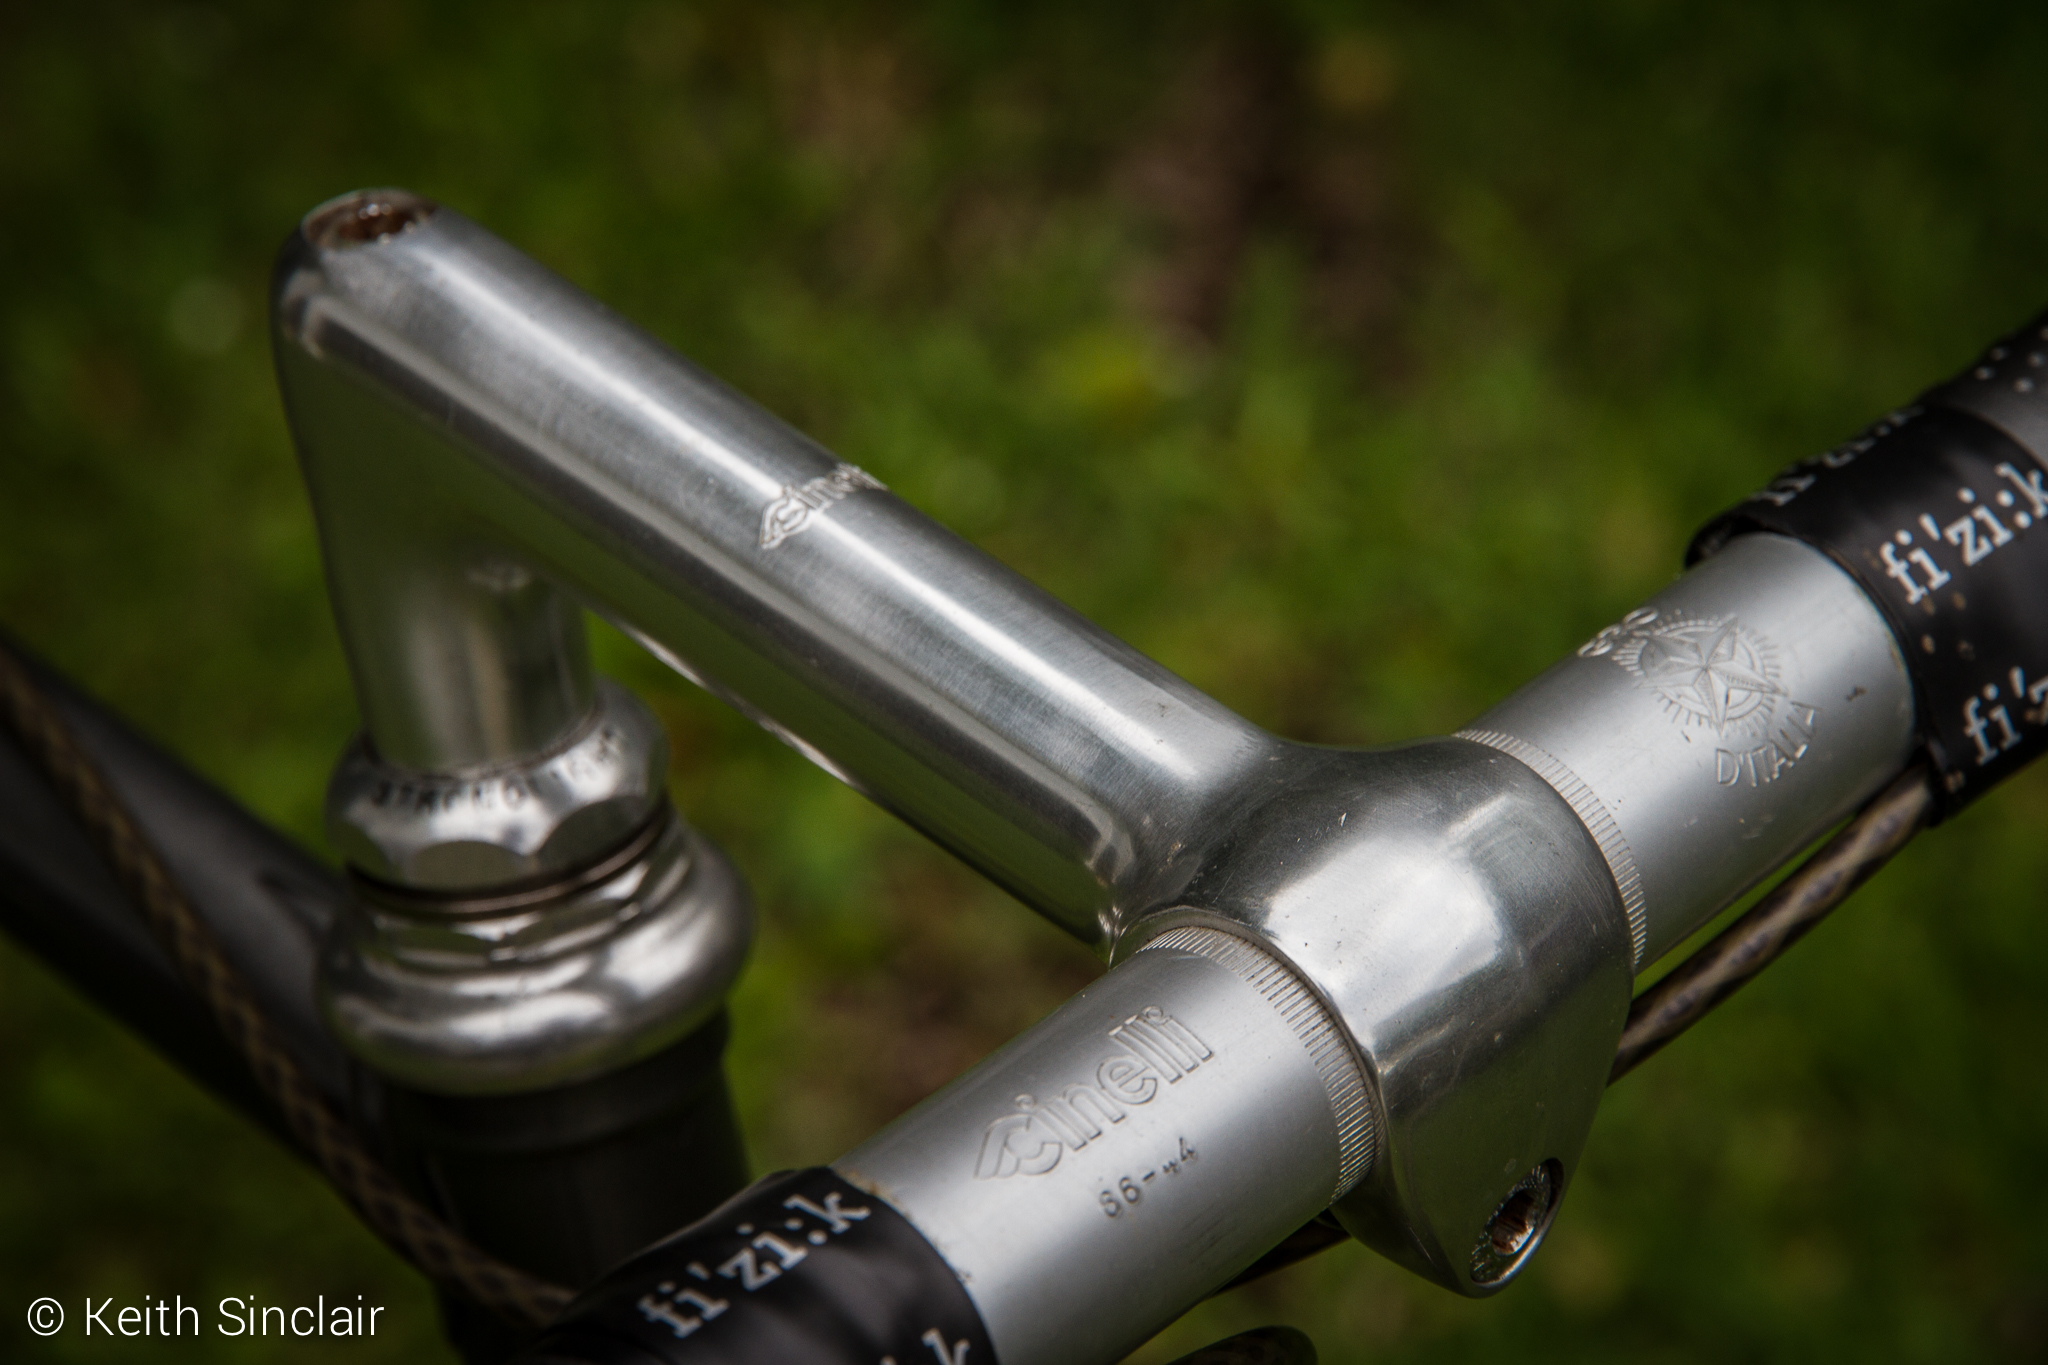 Cinelli Bar and Quill Stem